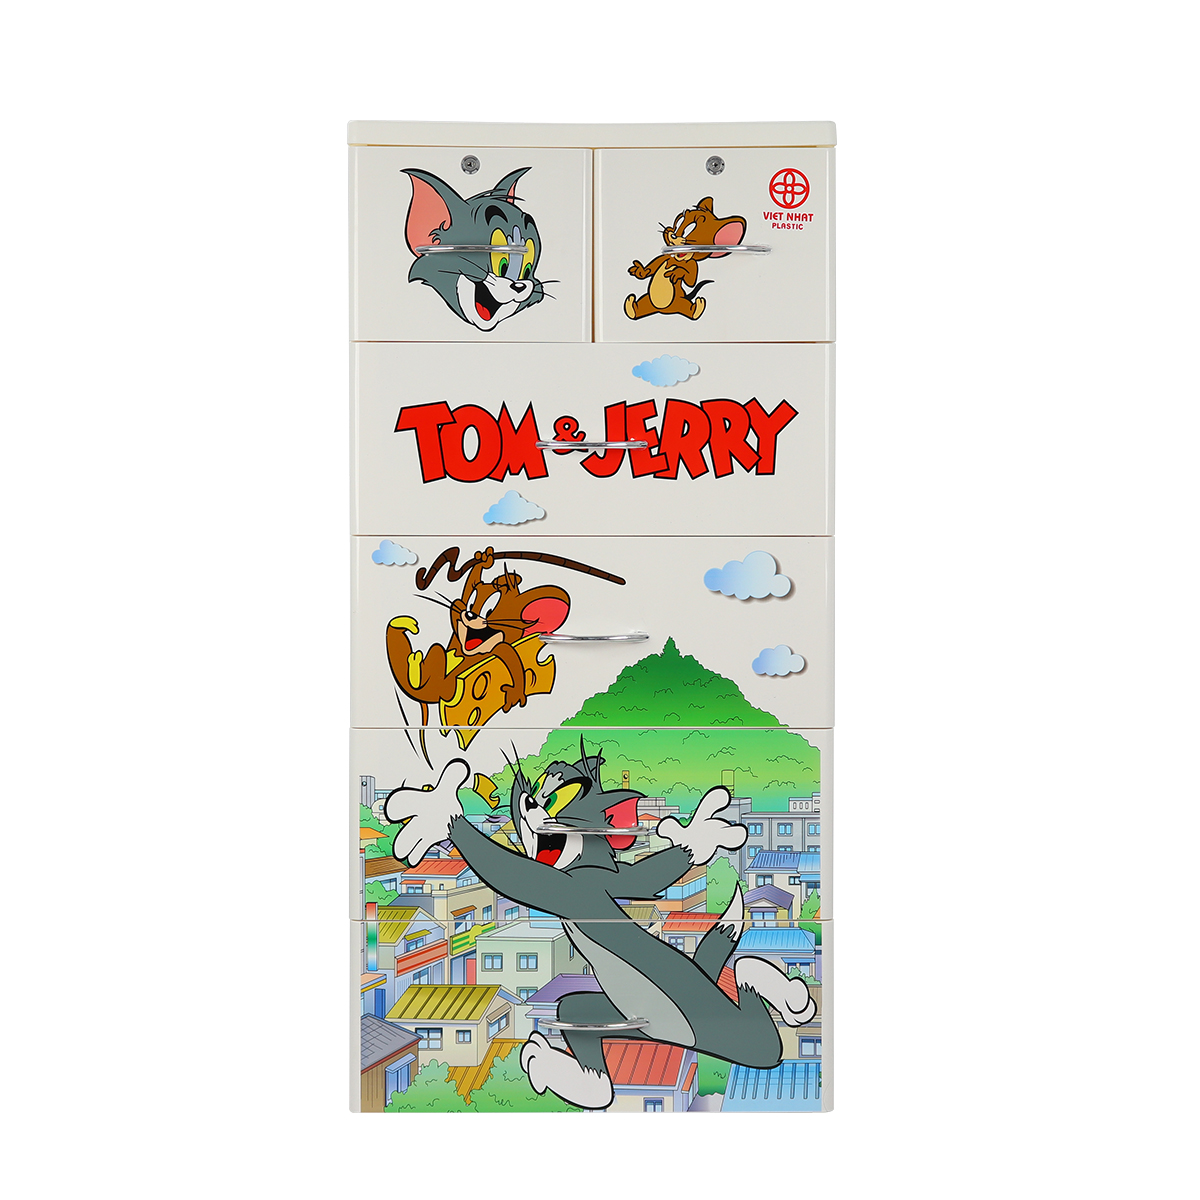 Tủ lucky 5T - Tom & Jerry